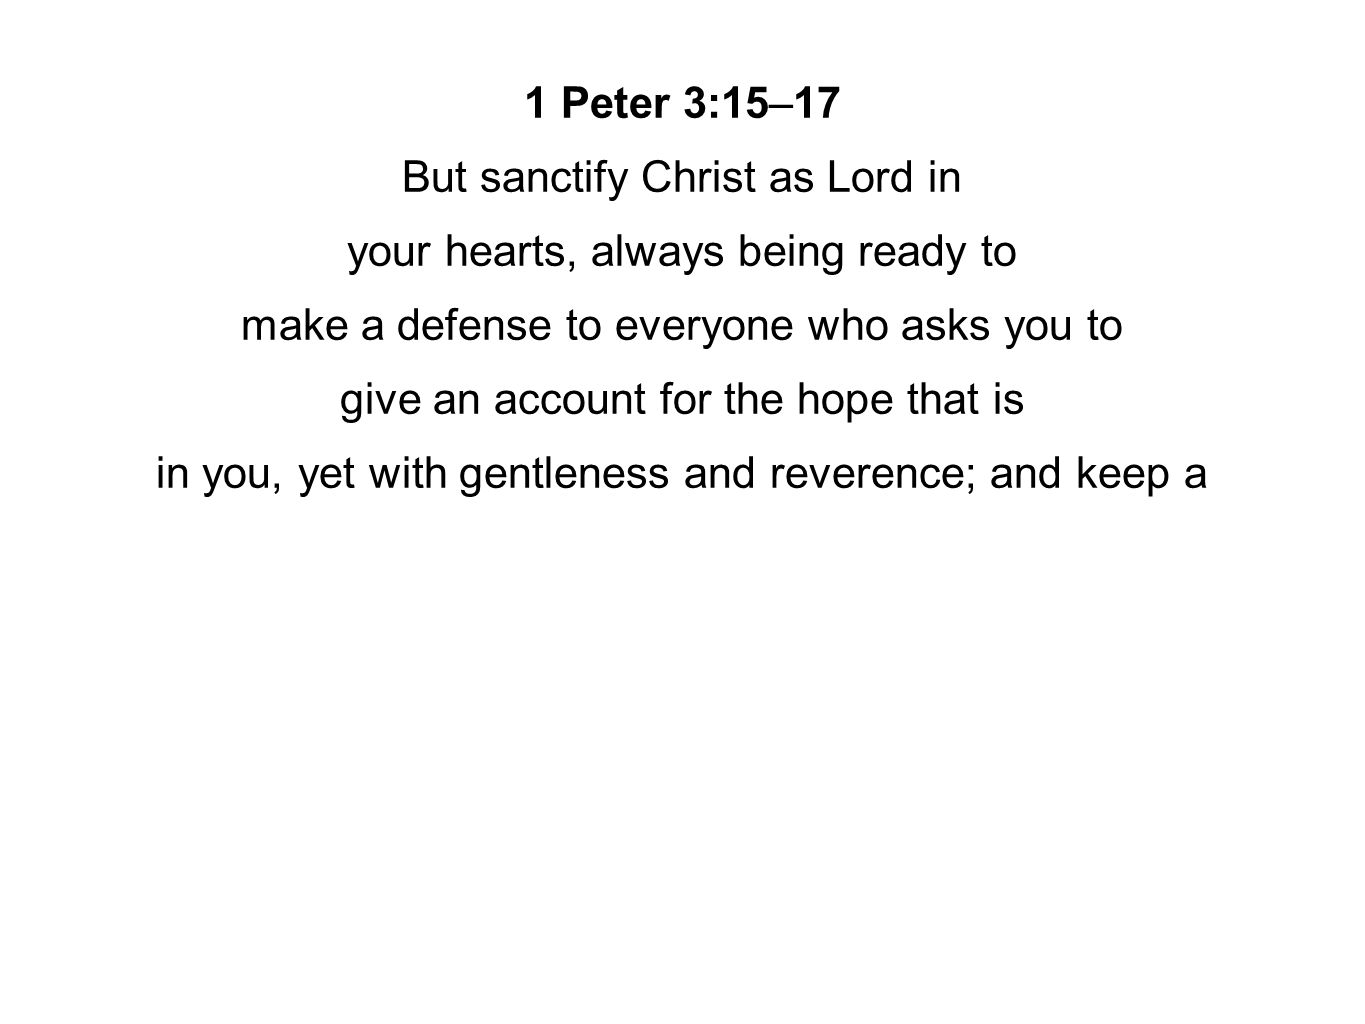 1 Peter 3:15–17 But sanctify Christ as Lord in your hearts, always being ready to make a defense to everyone who asks you to give an account for the hope that is in you, yet with gentleness and reverence; and keep a